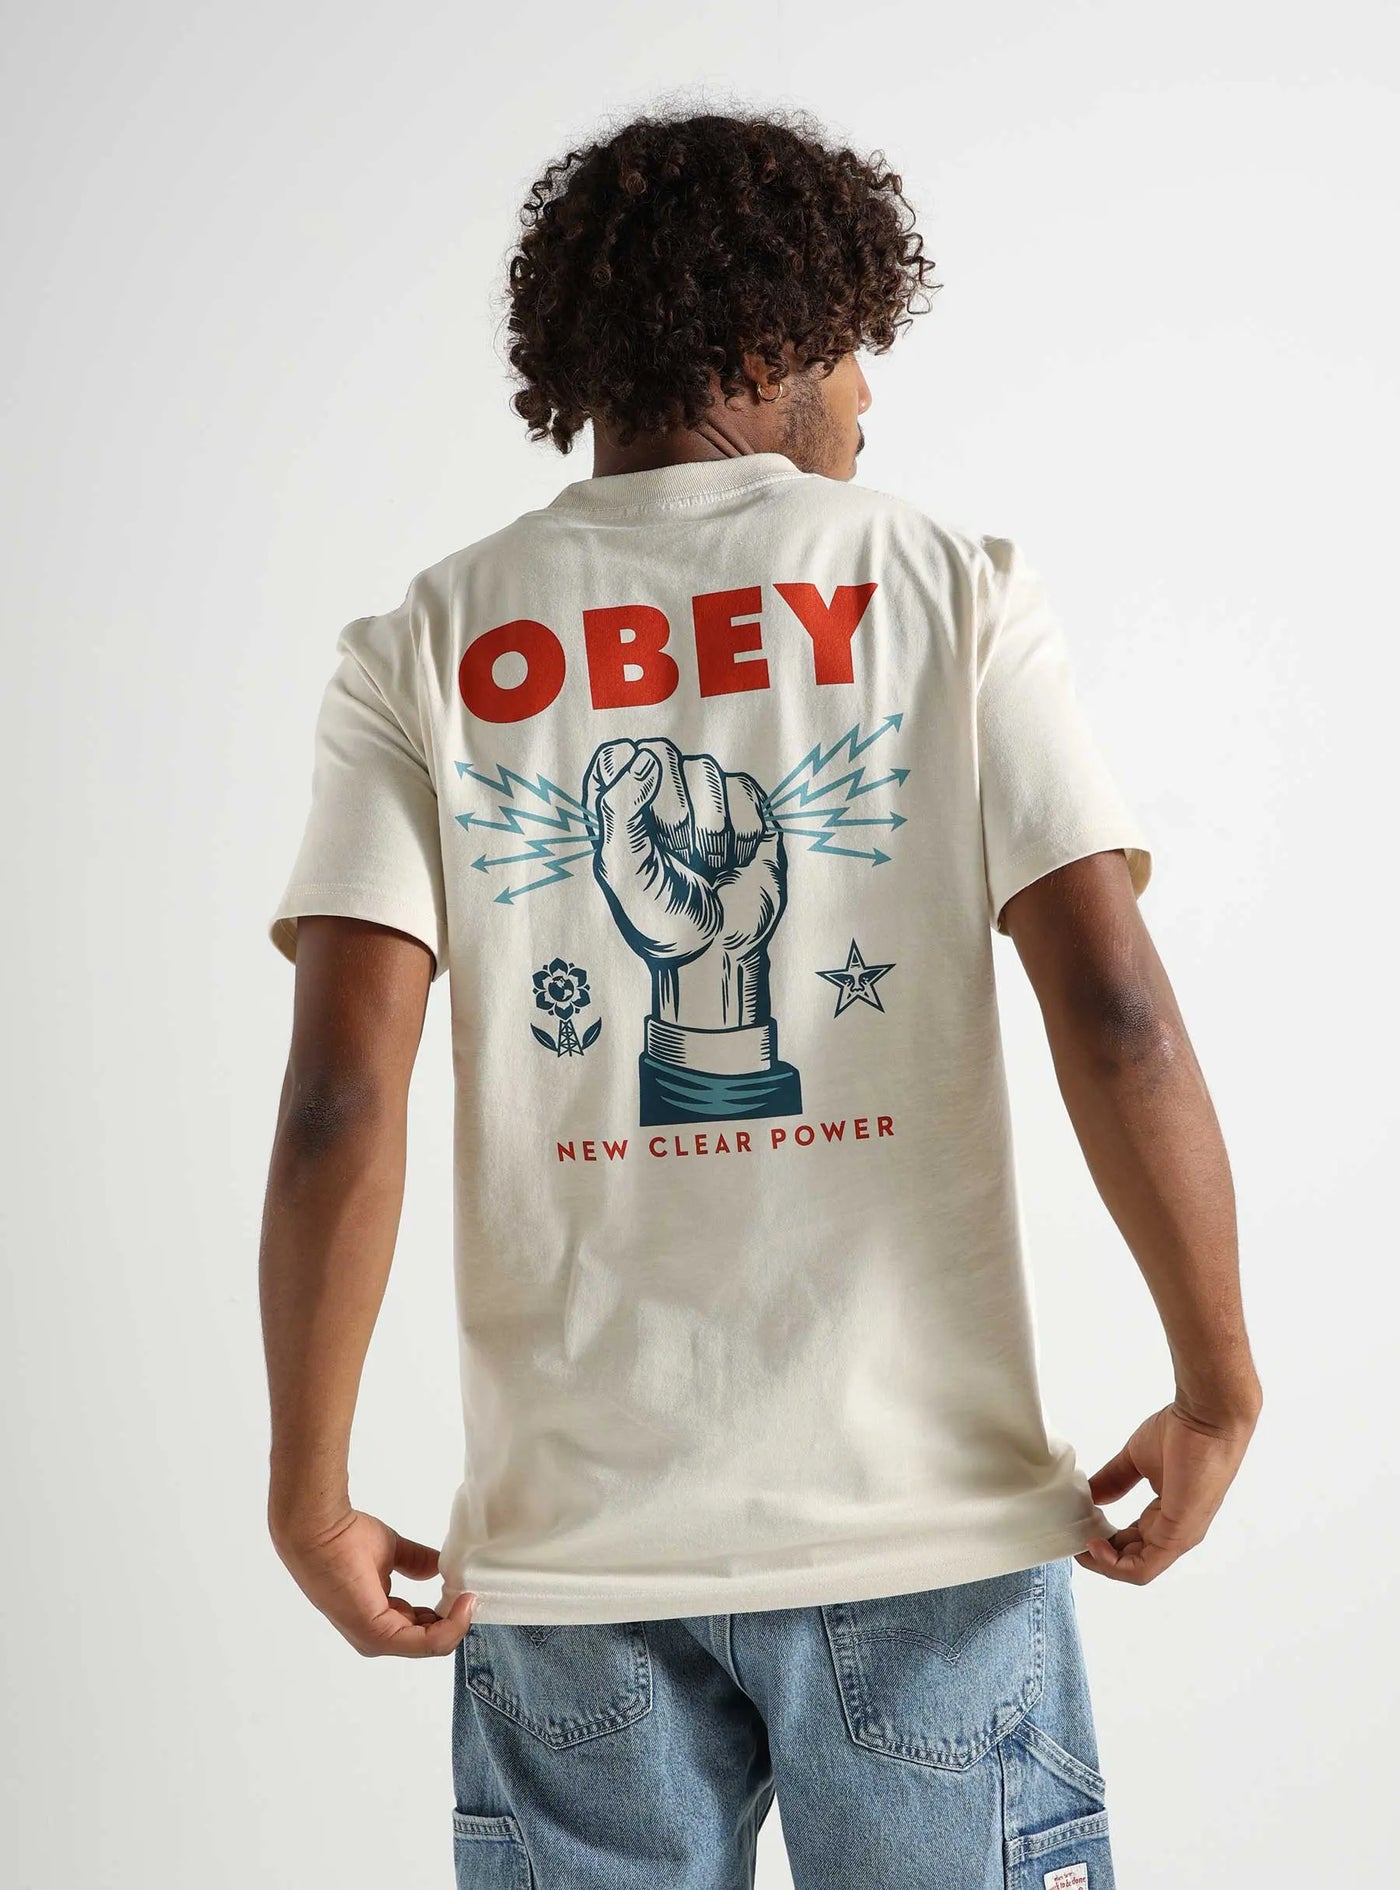 OBEY NEW CLEAR POWER (CREAM)